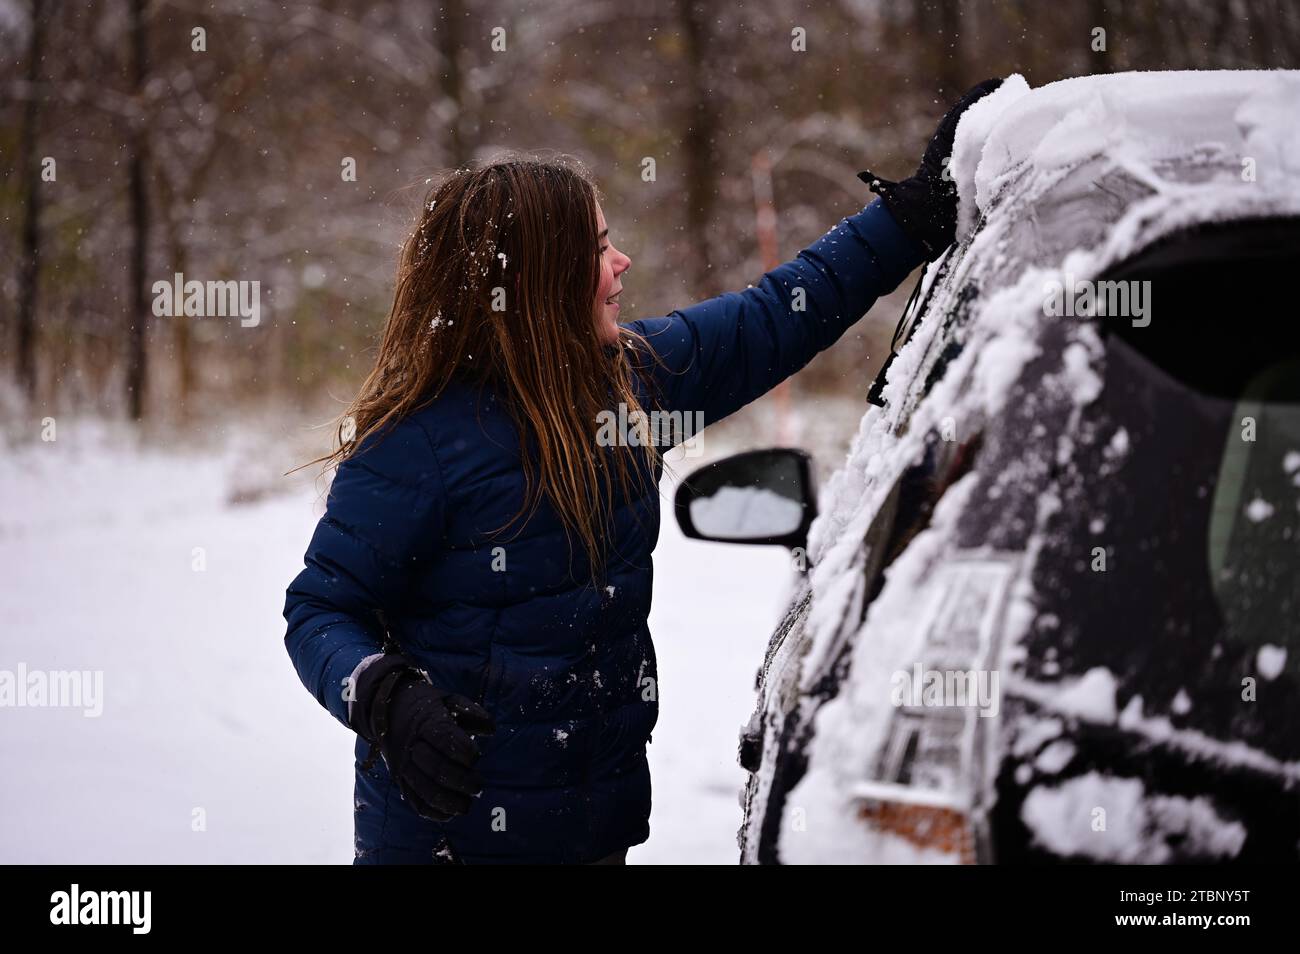 Smiling tween boy clearing snow from on top of car in winter Stock Photo